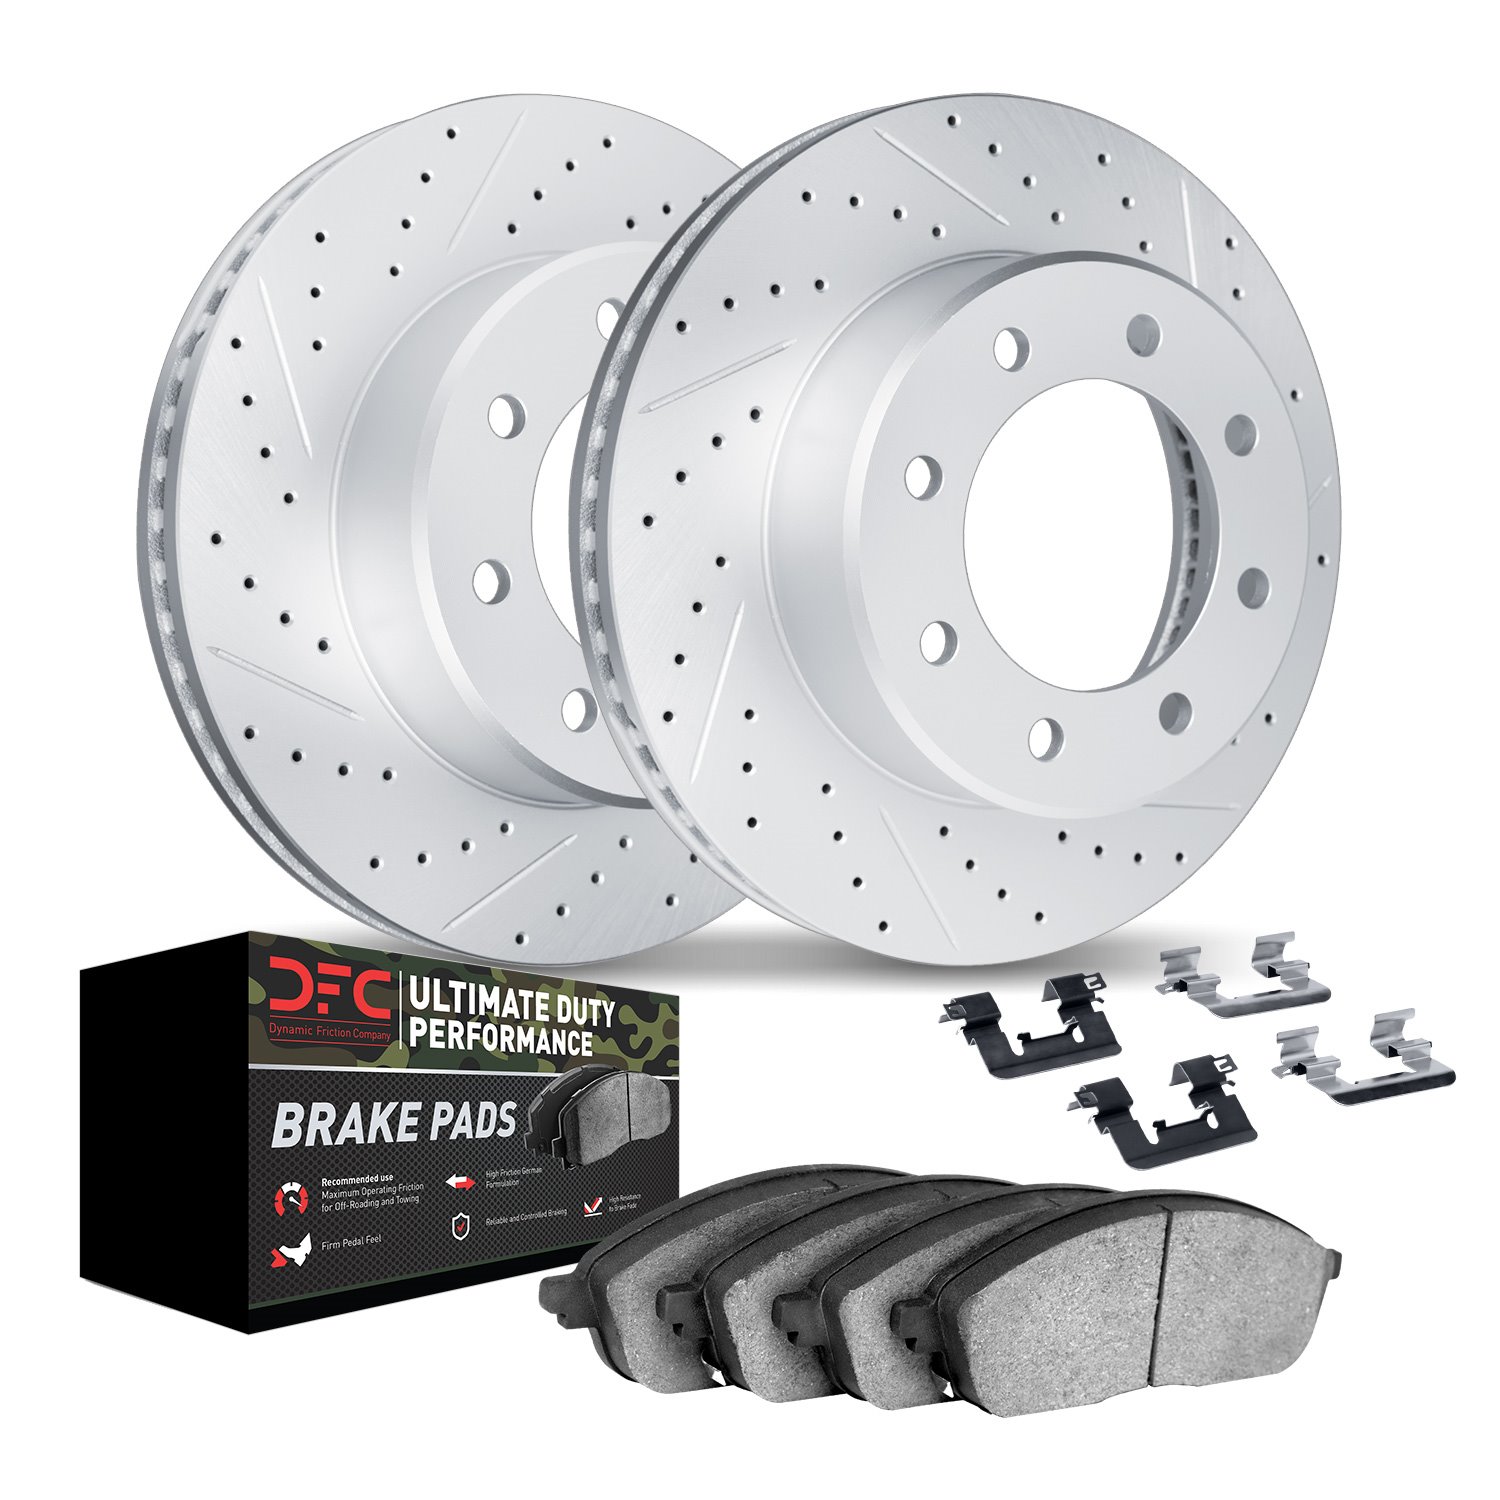 2412-54062 Geoperformance Drilled/Slotted Brake Rotors with Ultimate-Duty Brake Pads Kit & Hardware, 2005-2007 Ford/Lincoln/Merc